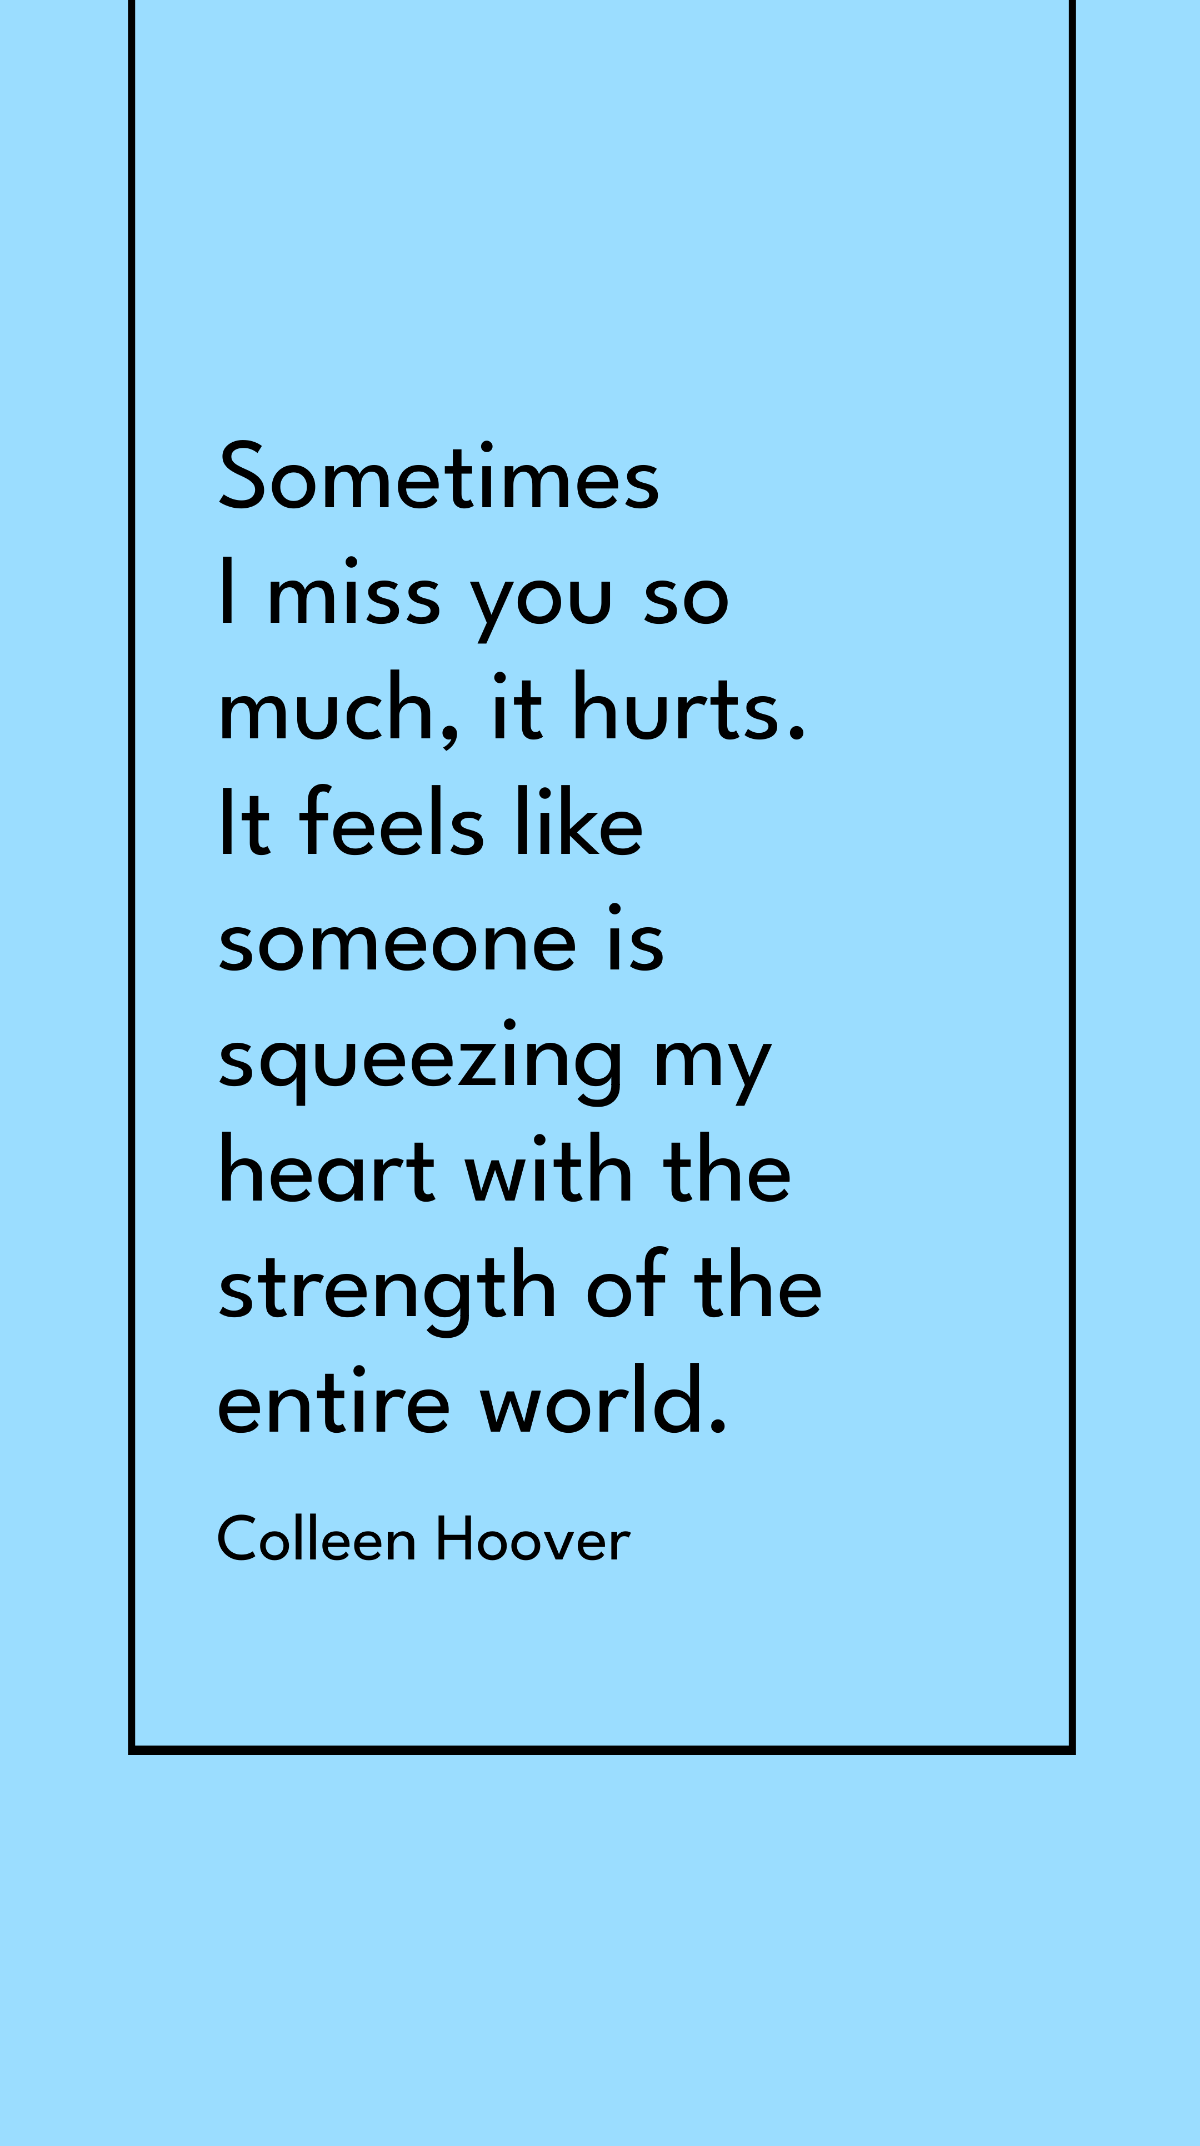 Colleen Hoover - Sometimes I miss you so much, it hurts. It feels like someone is squeezing my heart with the strength of the entire world. Template